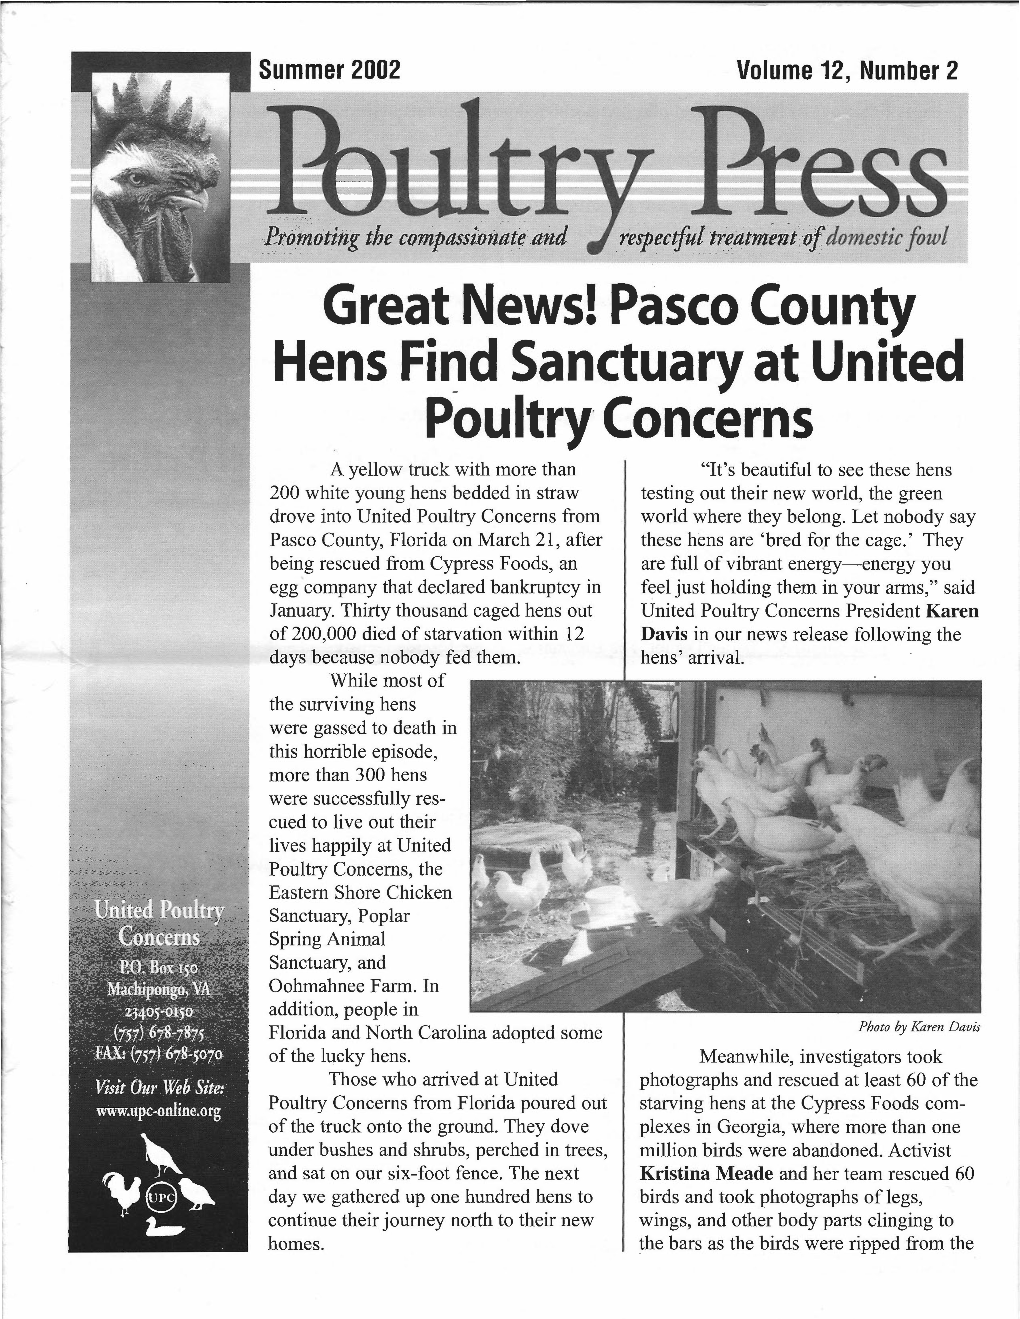 UPC Summer 2002 Poultry Press